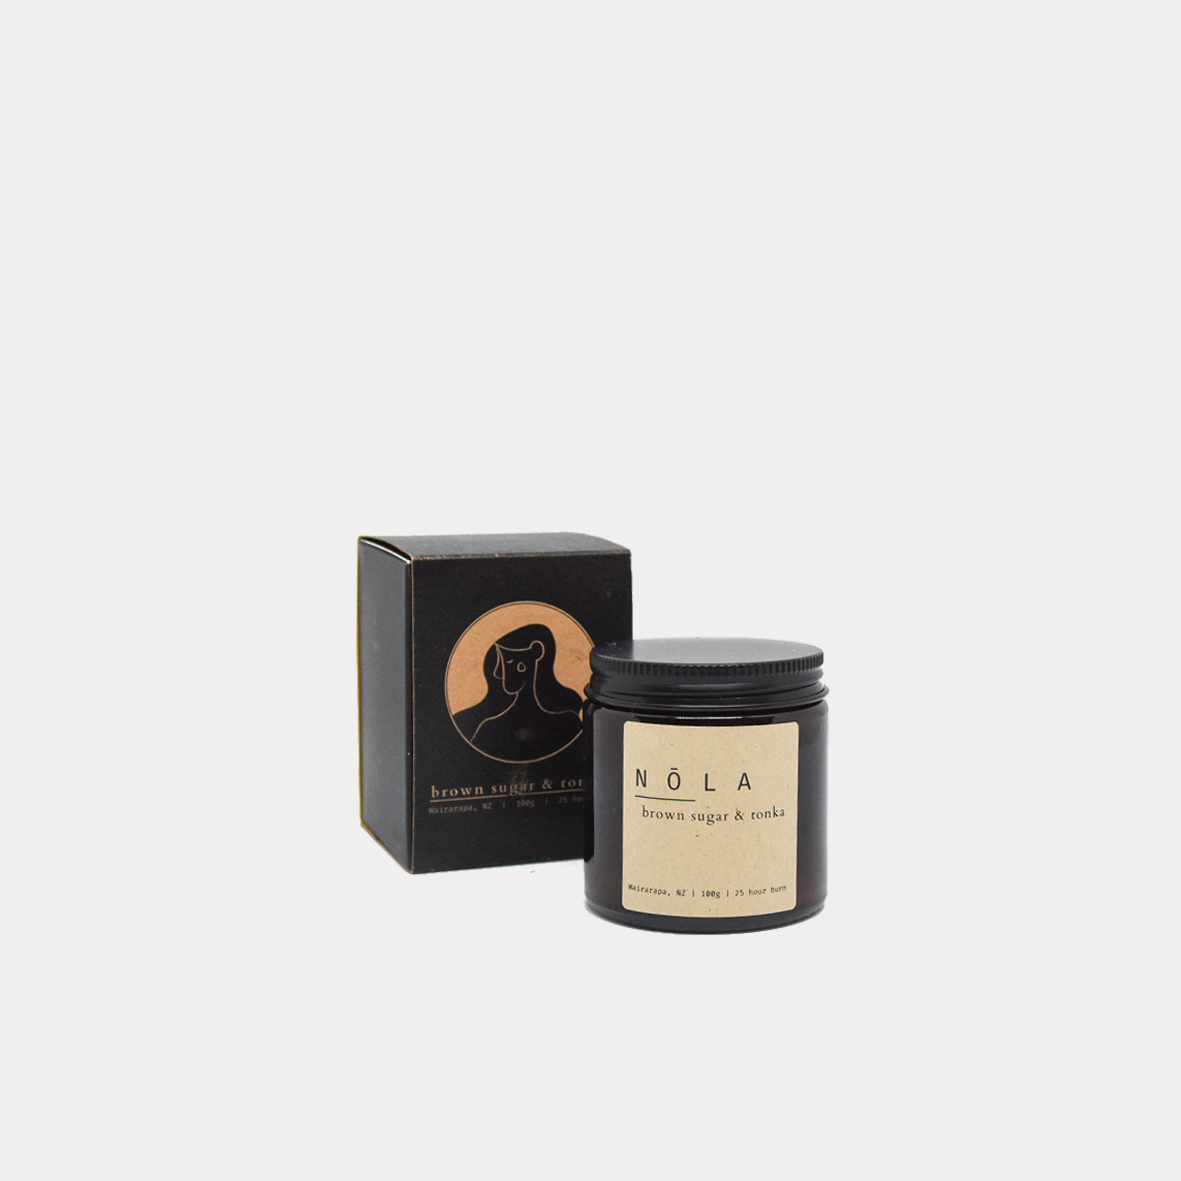 Nōla soy candle with wooden wick - brown sugar & tonka, hand poured in New Zealand